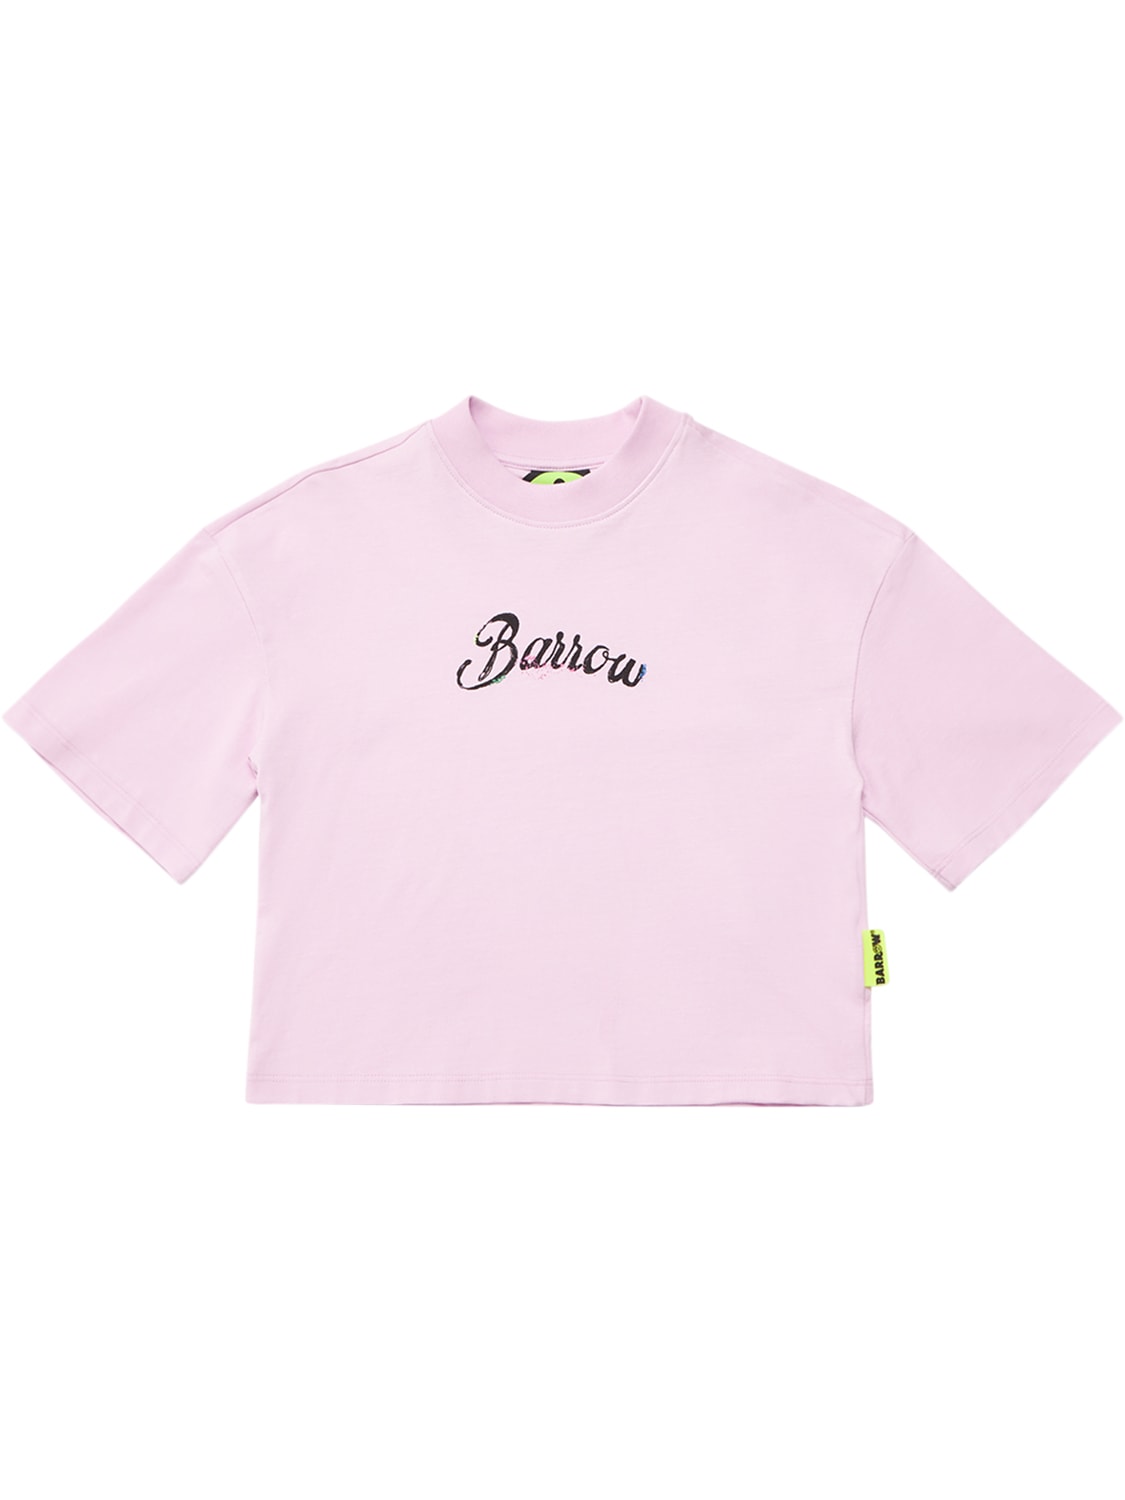 Barrow Kids' Printed Cotton Jersey Cropped T-shirt In Pink